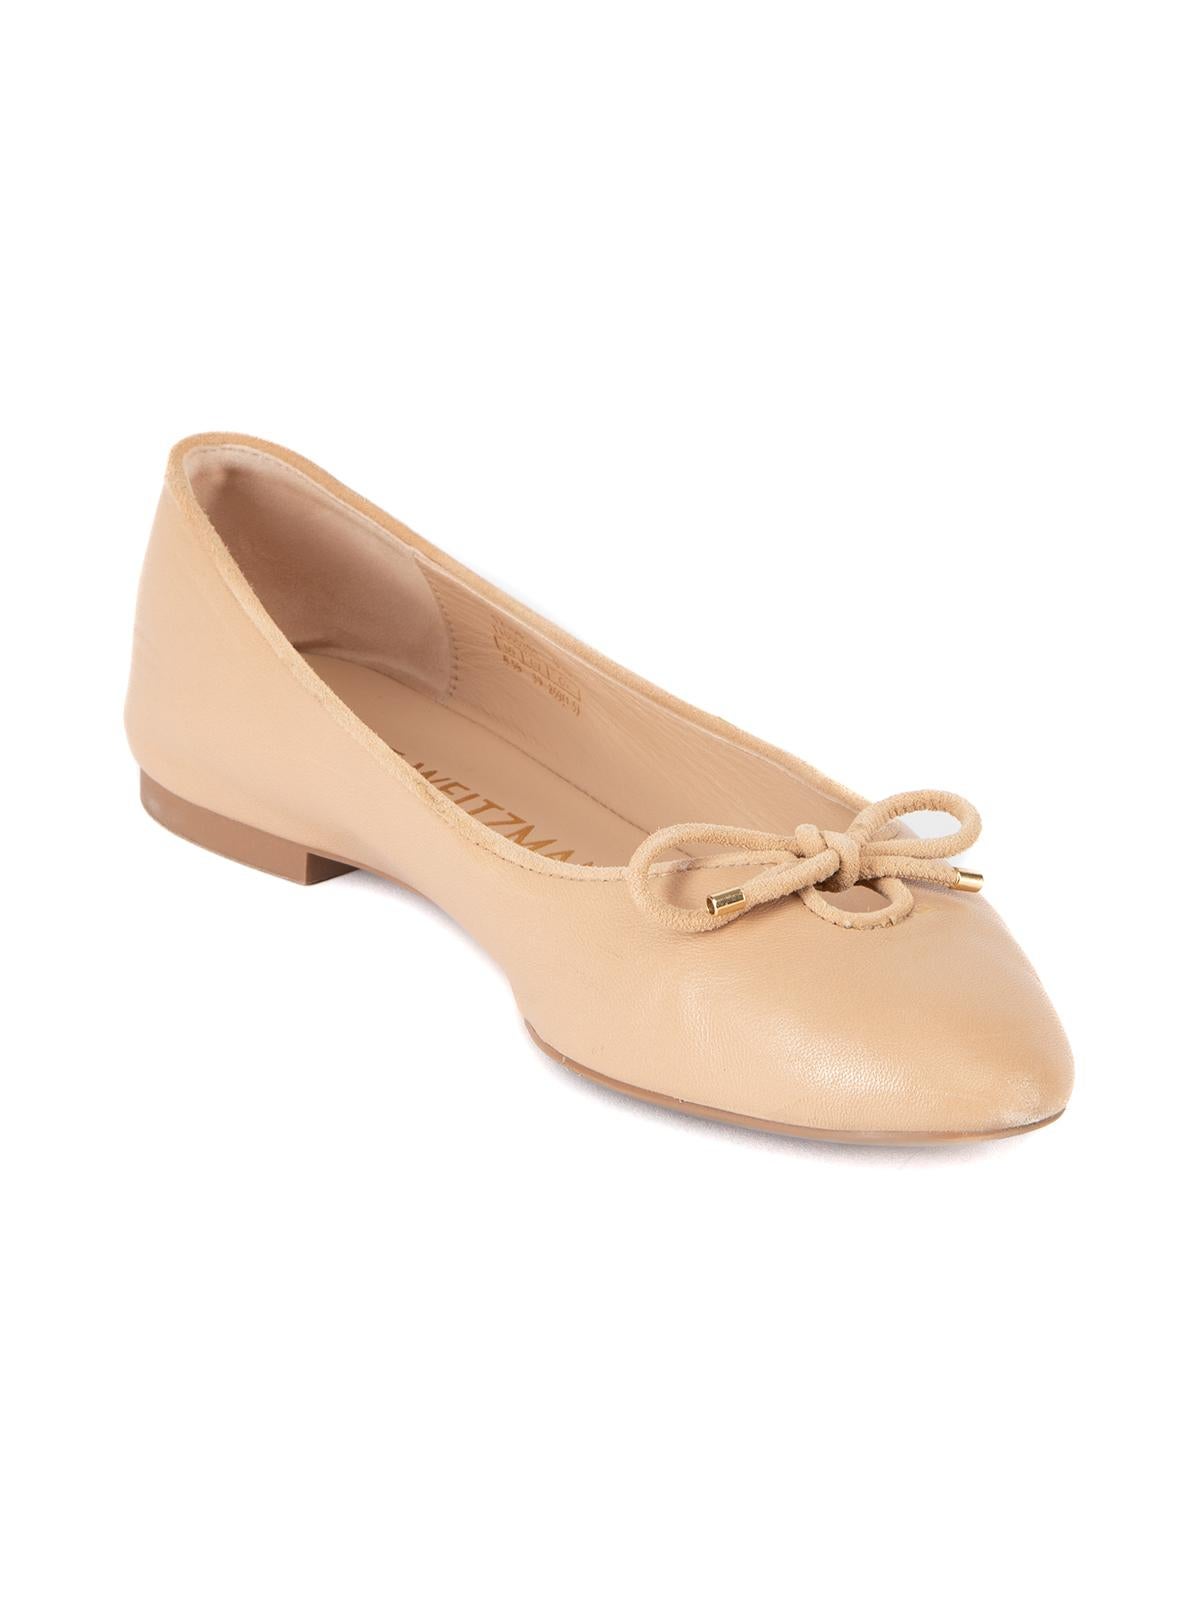 CONDITION is Very good. Minimal wear to shoes is evident. Minimal wear to suede trim with some light scuffs on this used Stuart Weitzman designer resale item. Details Nude Leather Ballerina flats Almond toe String accessory, gold tone caps Comes